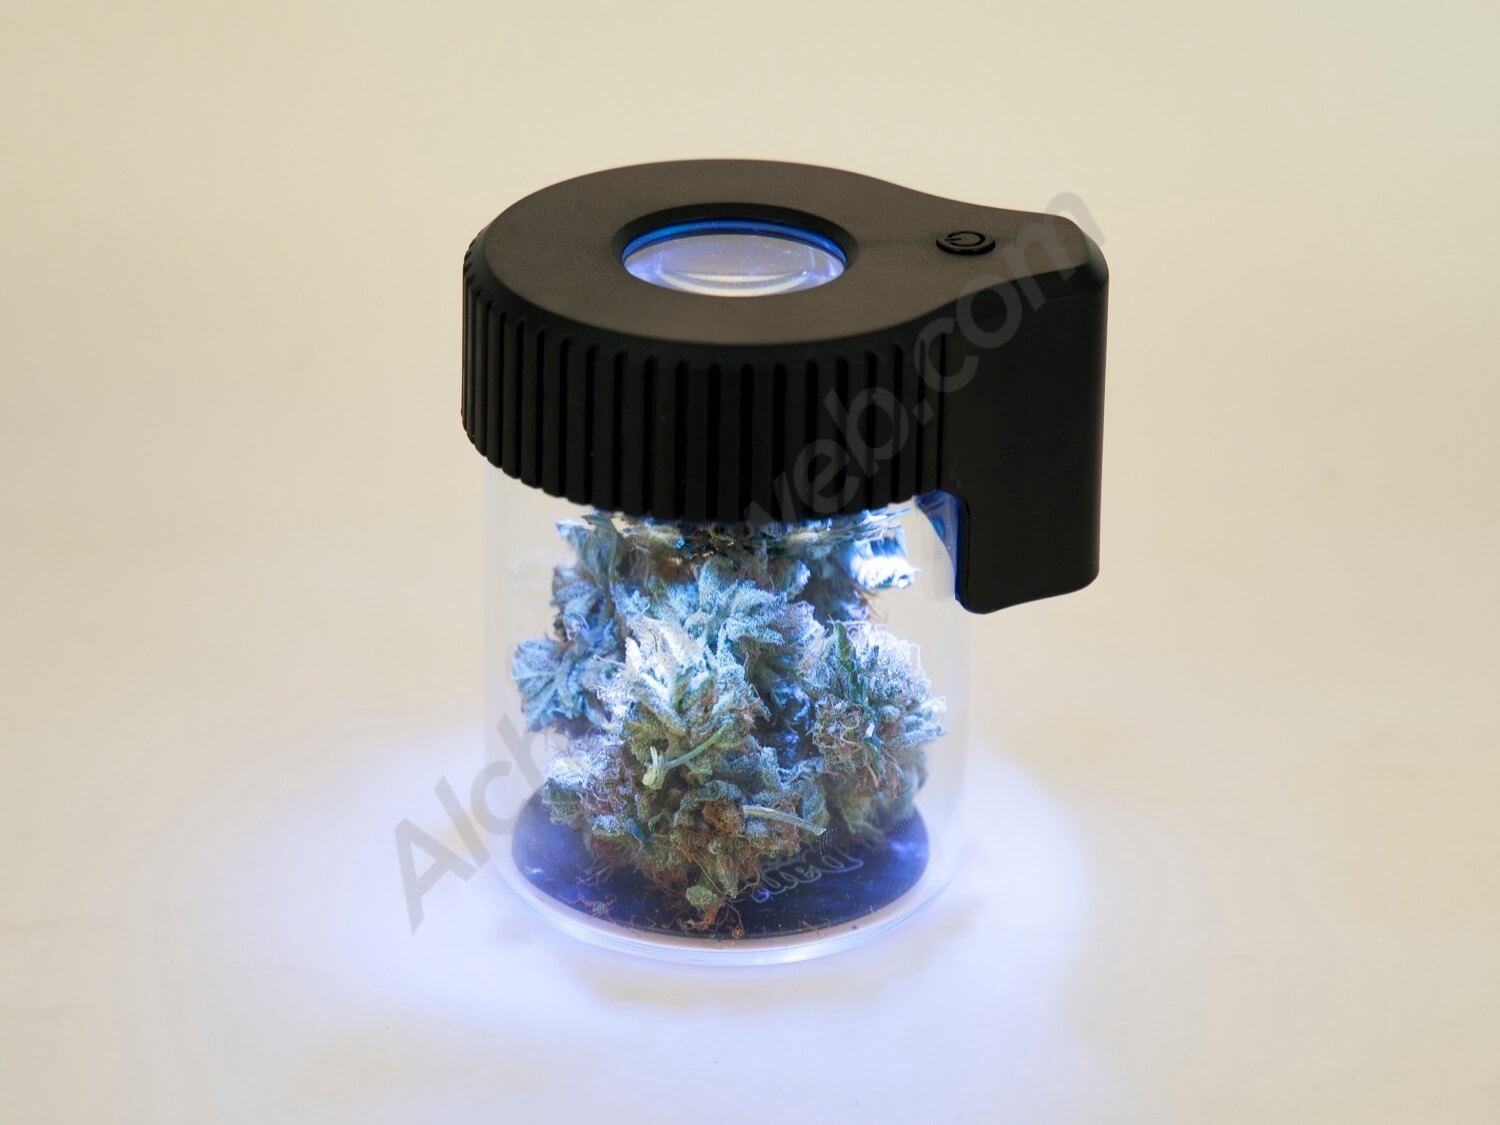 Dank 420 glass jar with LED light and magnifying glass